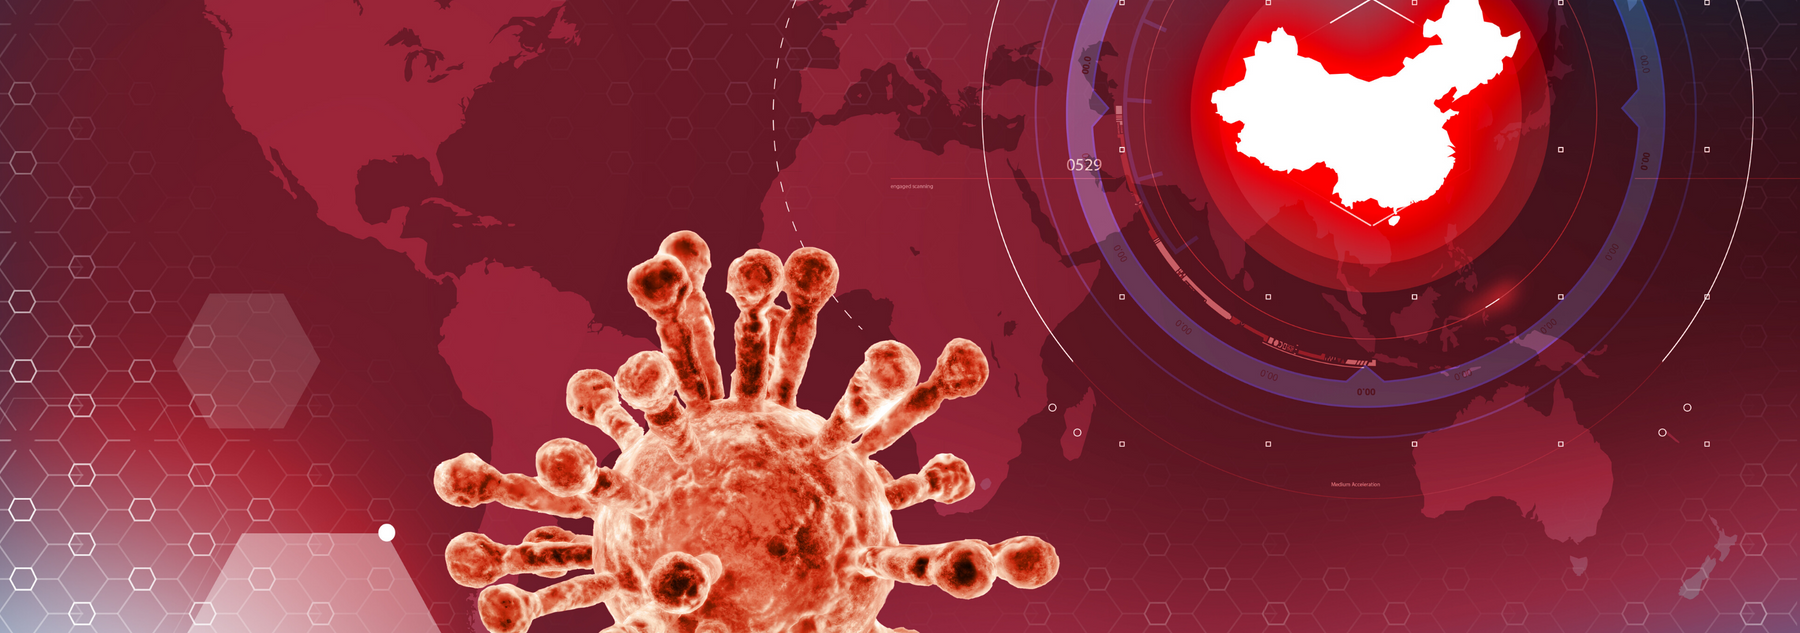 What Is A Pandemic And How Do We Avoid Infection?